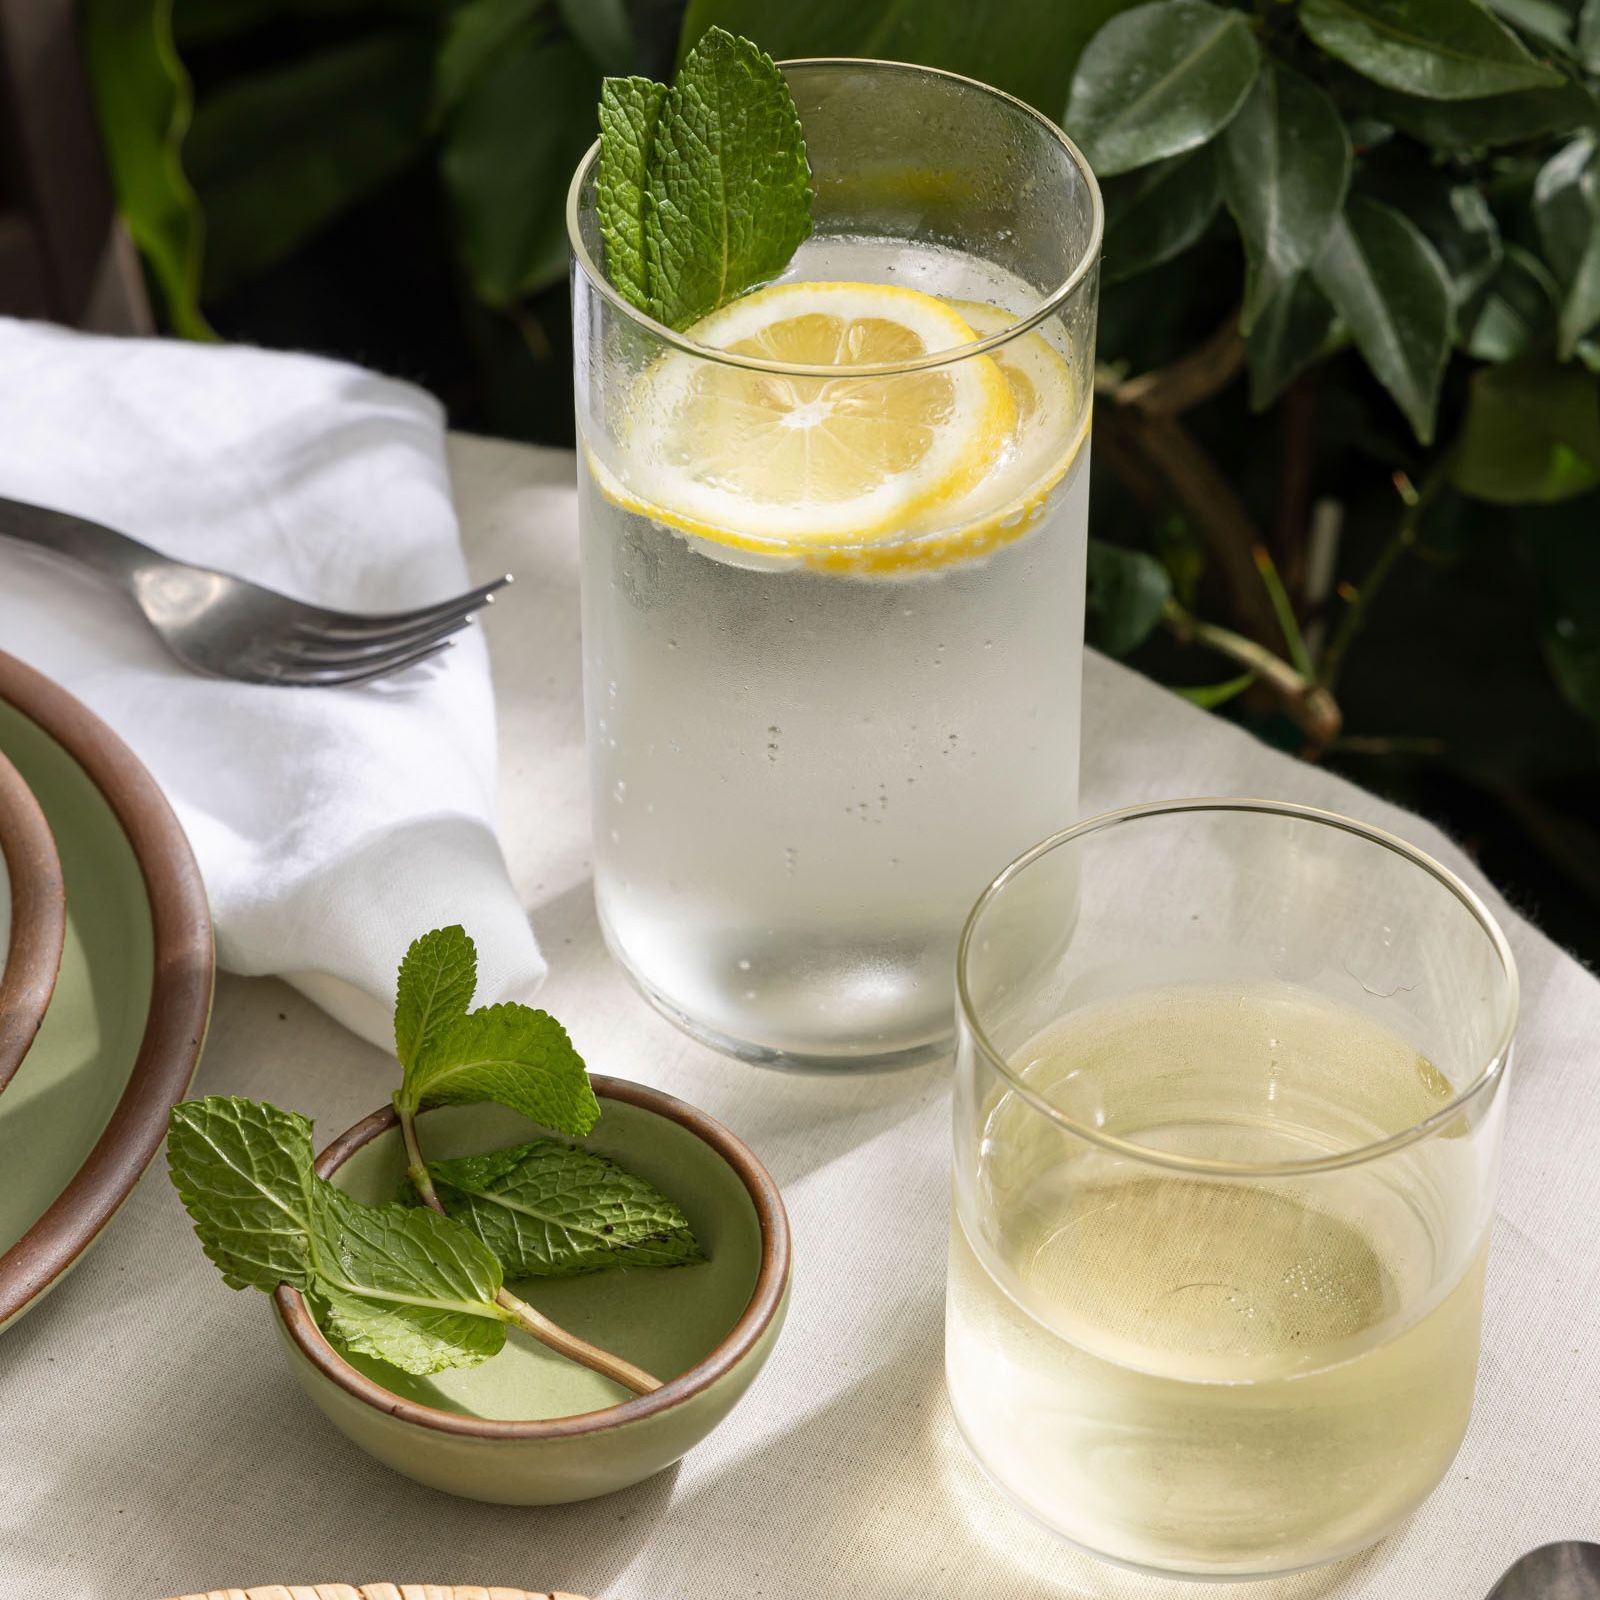 On a table outdoors, sits 2 straight walled glass cups, one tall one short. The short one is filled with wine, and the tall is filled with lemon water and mint. Next to the glasses is a small ceramic bowl in a sage green color with mint leaves inside.